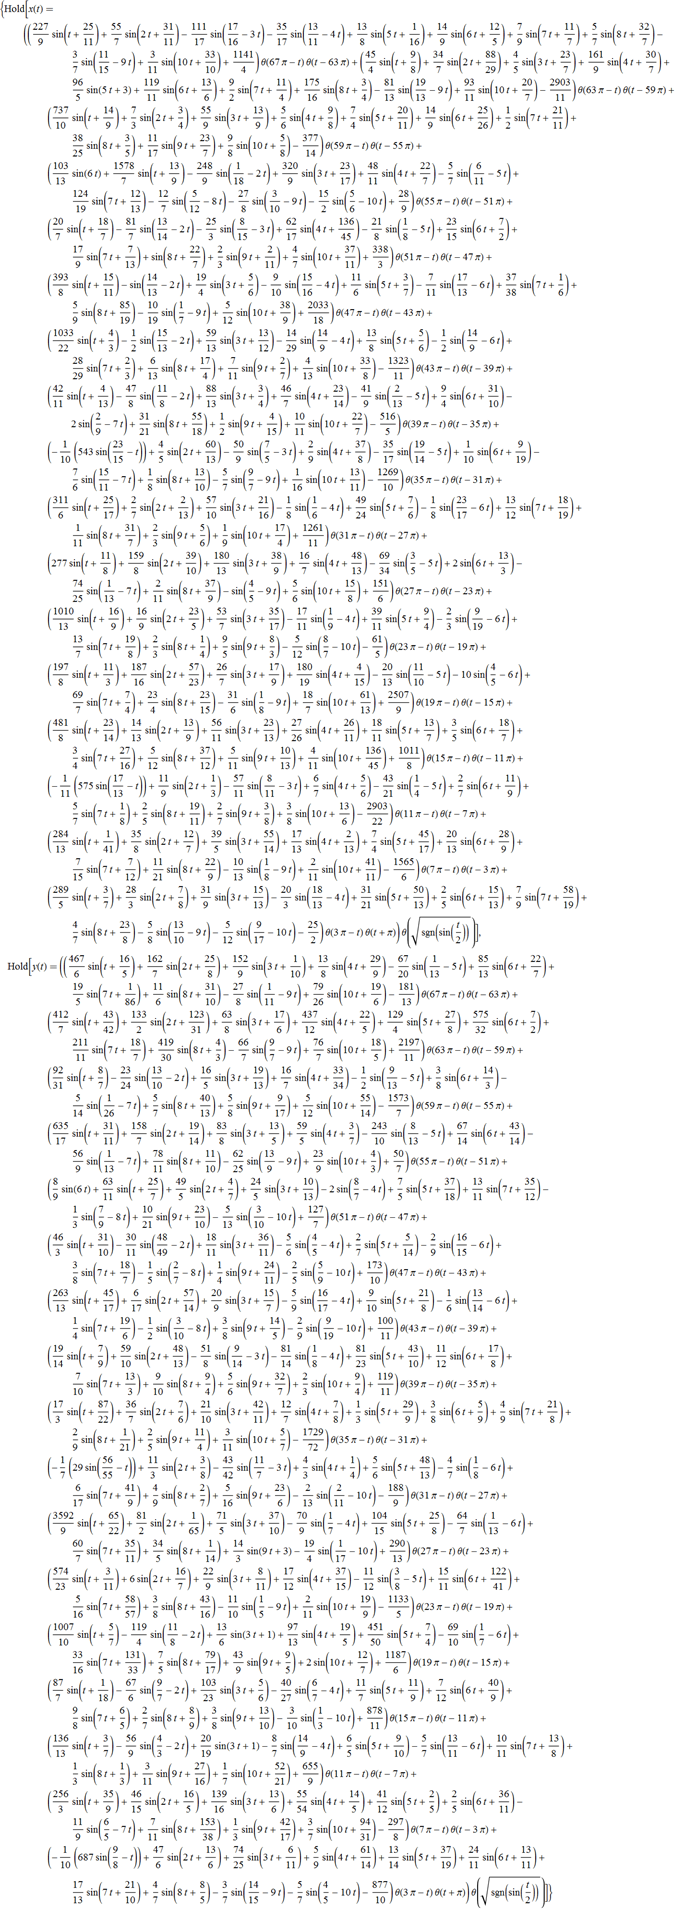 making-formulas-for-everything-from-pi-to-the-pink-panther-to-sir-isaac-newton_8.png